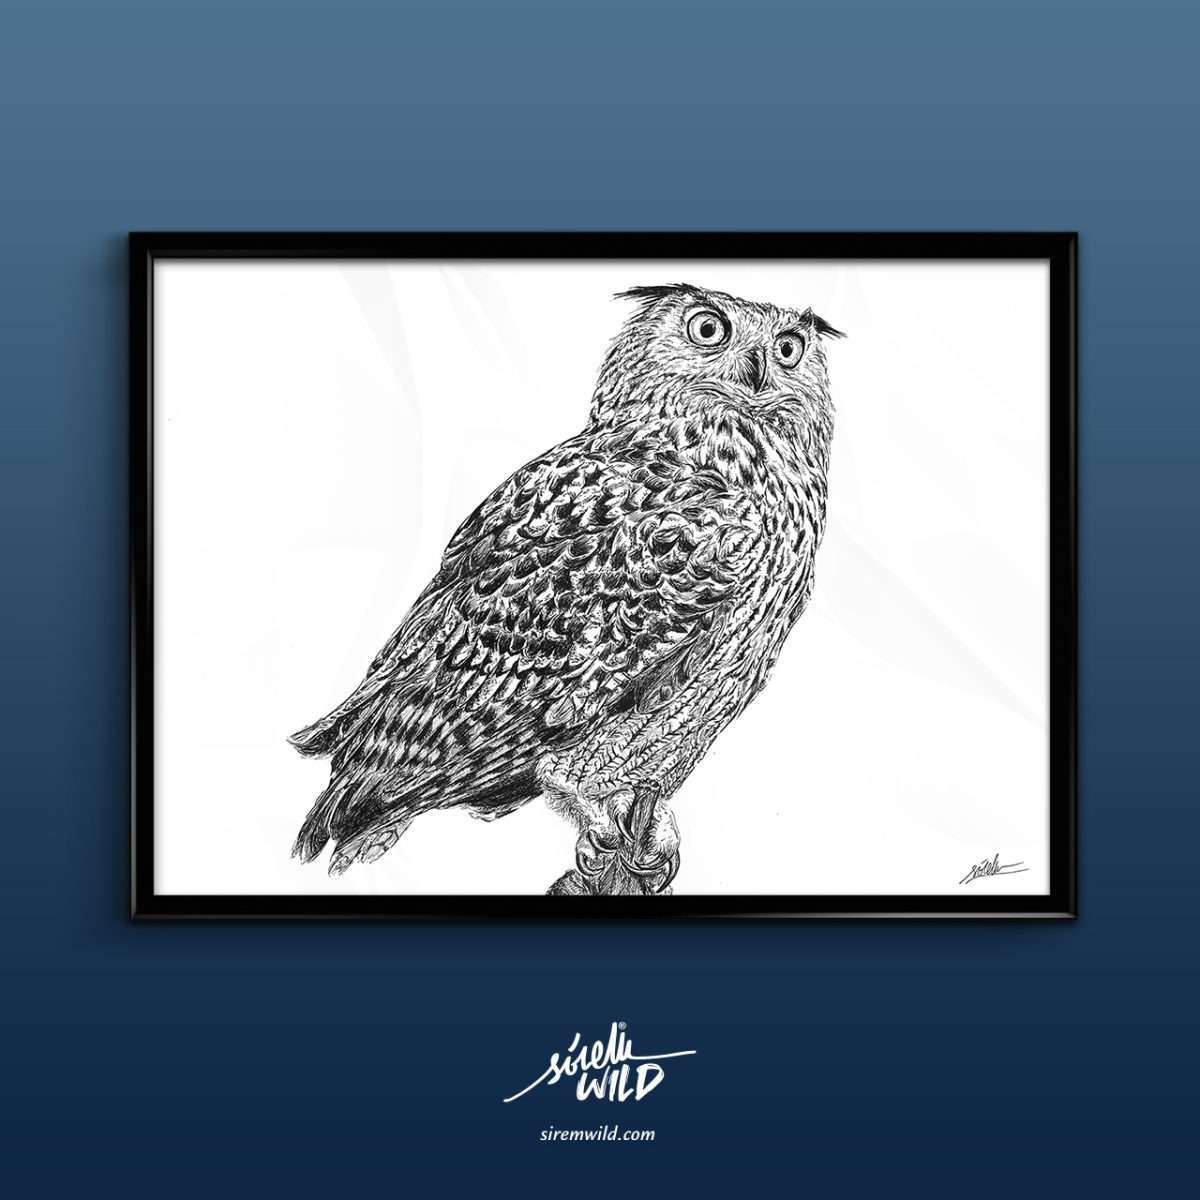 dibujo buho real-aves rapaces nocturnas-sirem wild